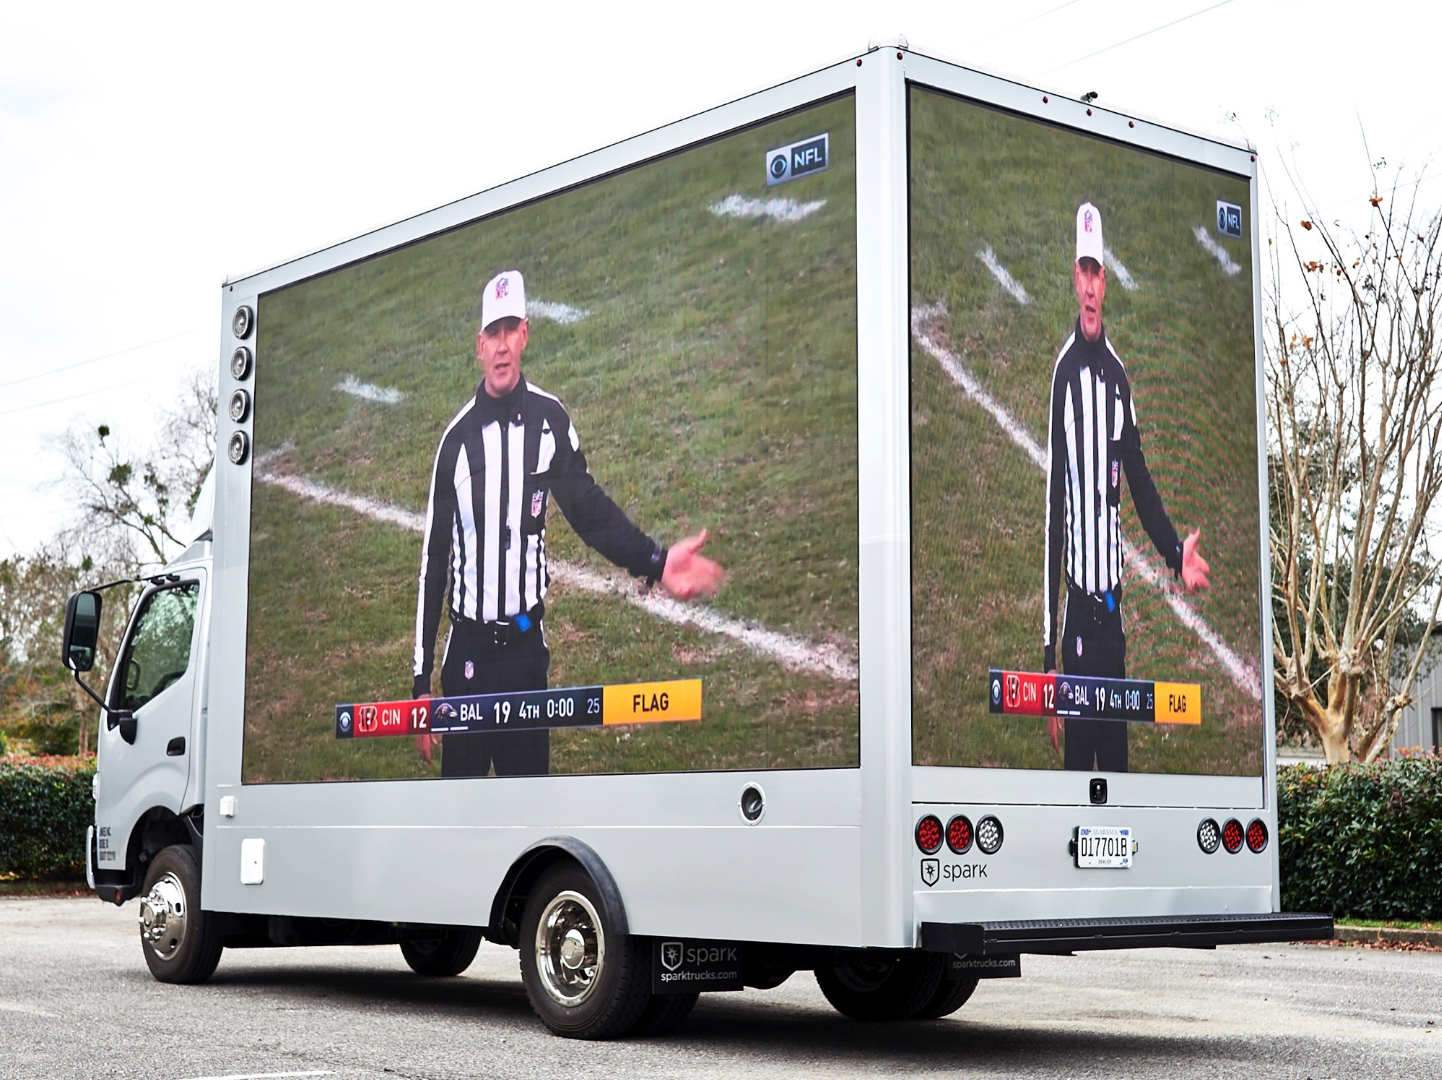 Image of Live Content Being Shown on Mobile Billboard Using Truck Side Advertising